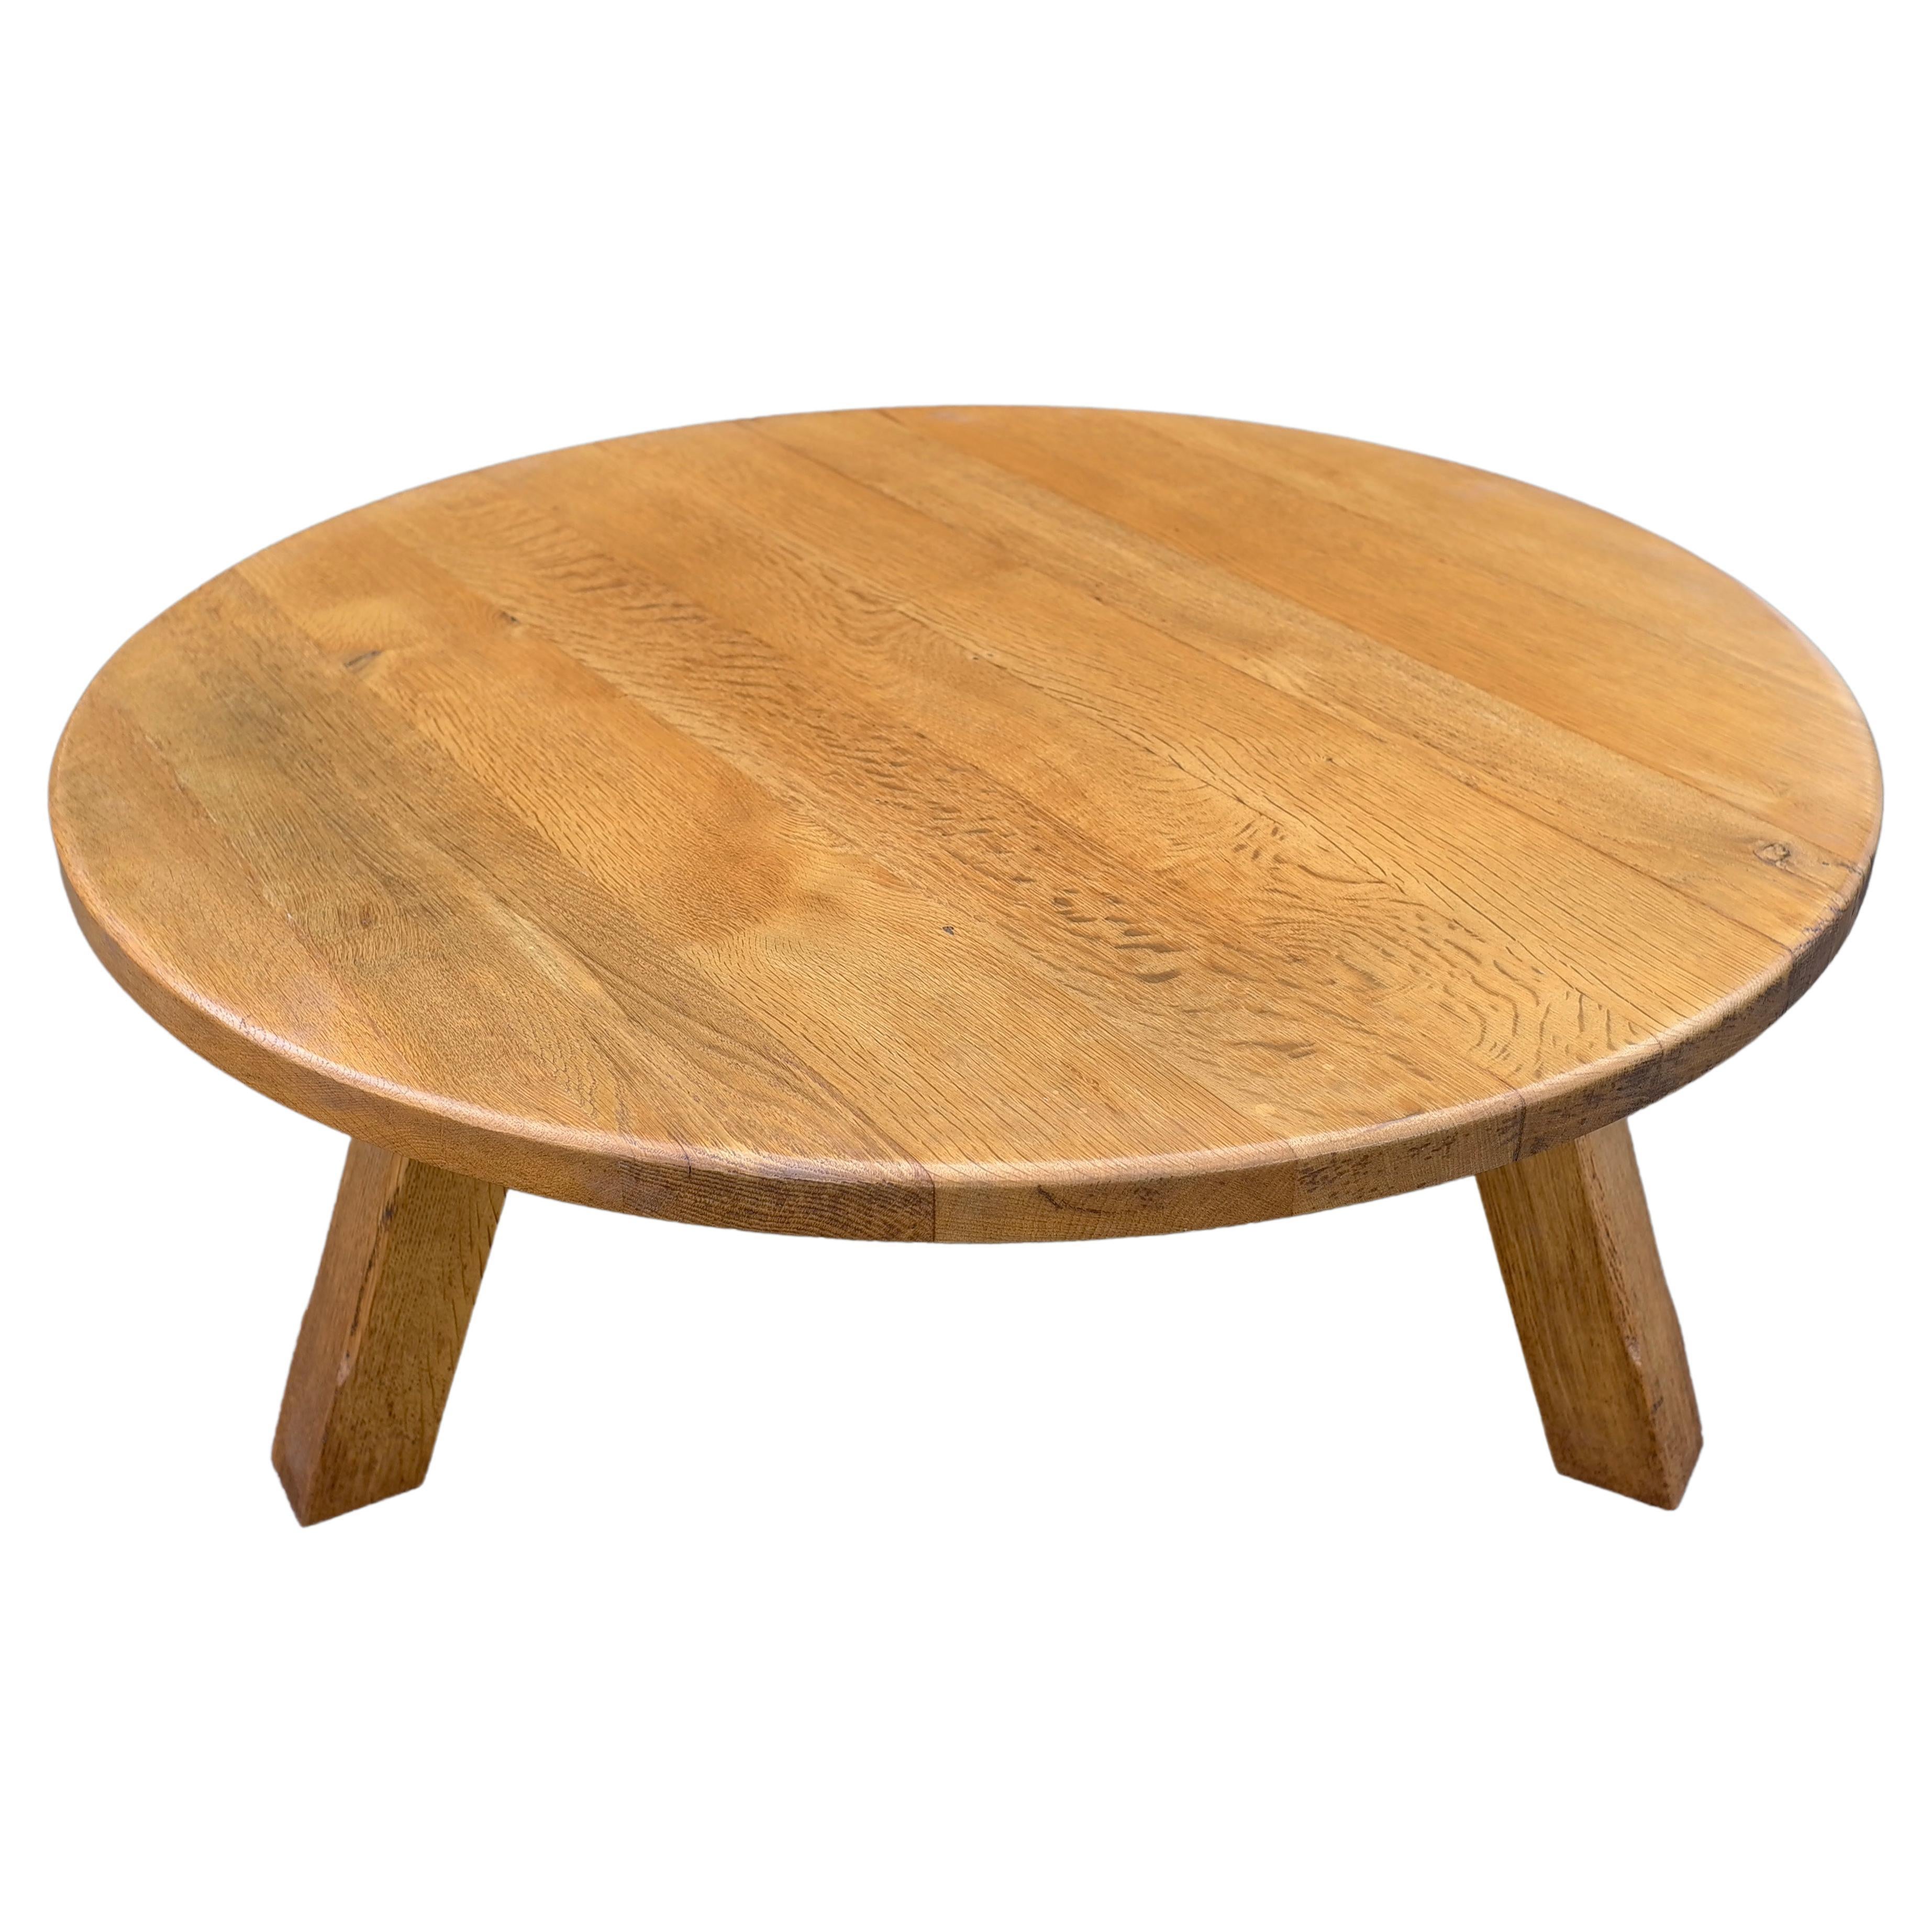 Mid-20th Century Solid Oak Round Coffee Table, France, 1960s For Sale